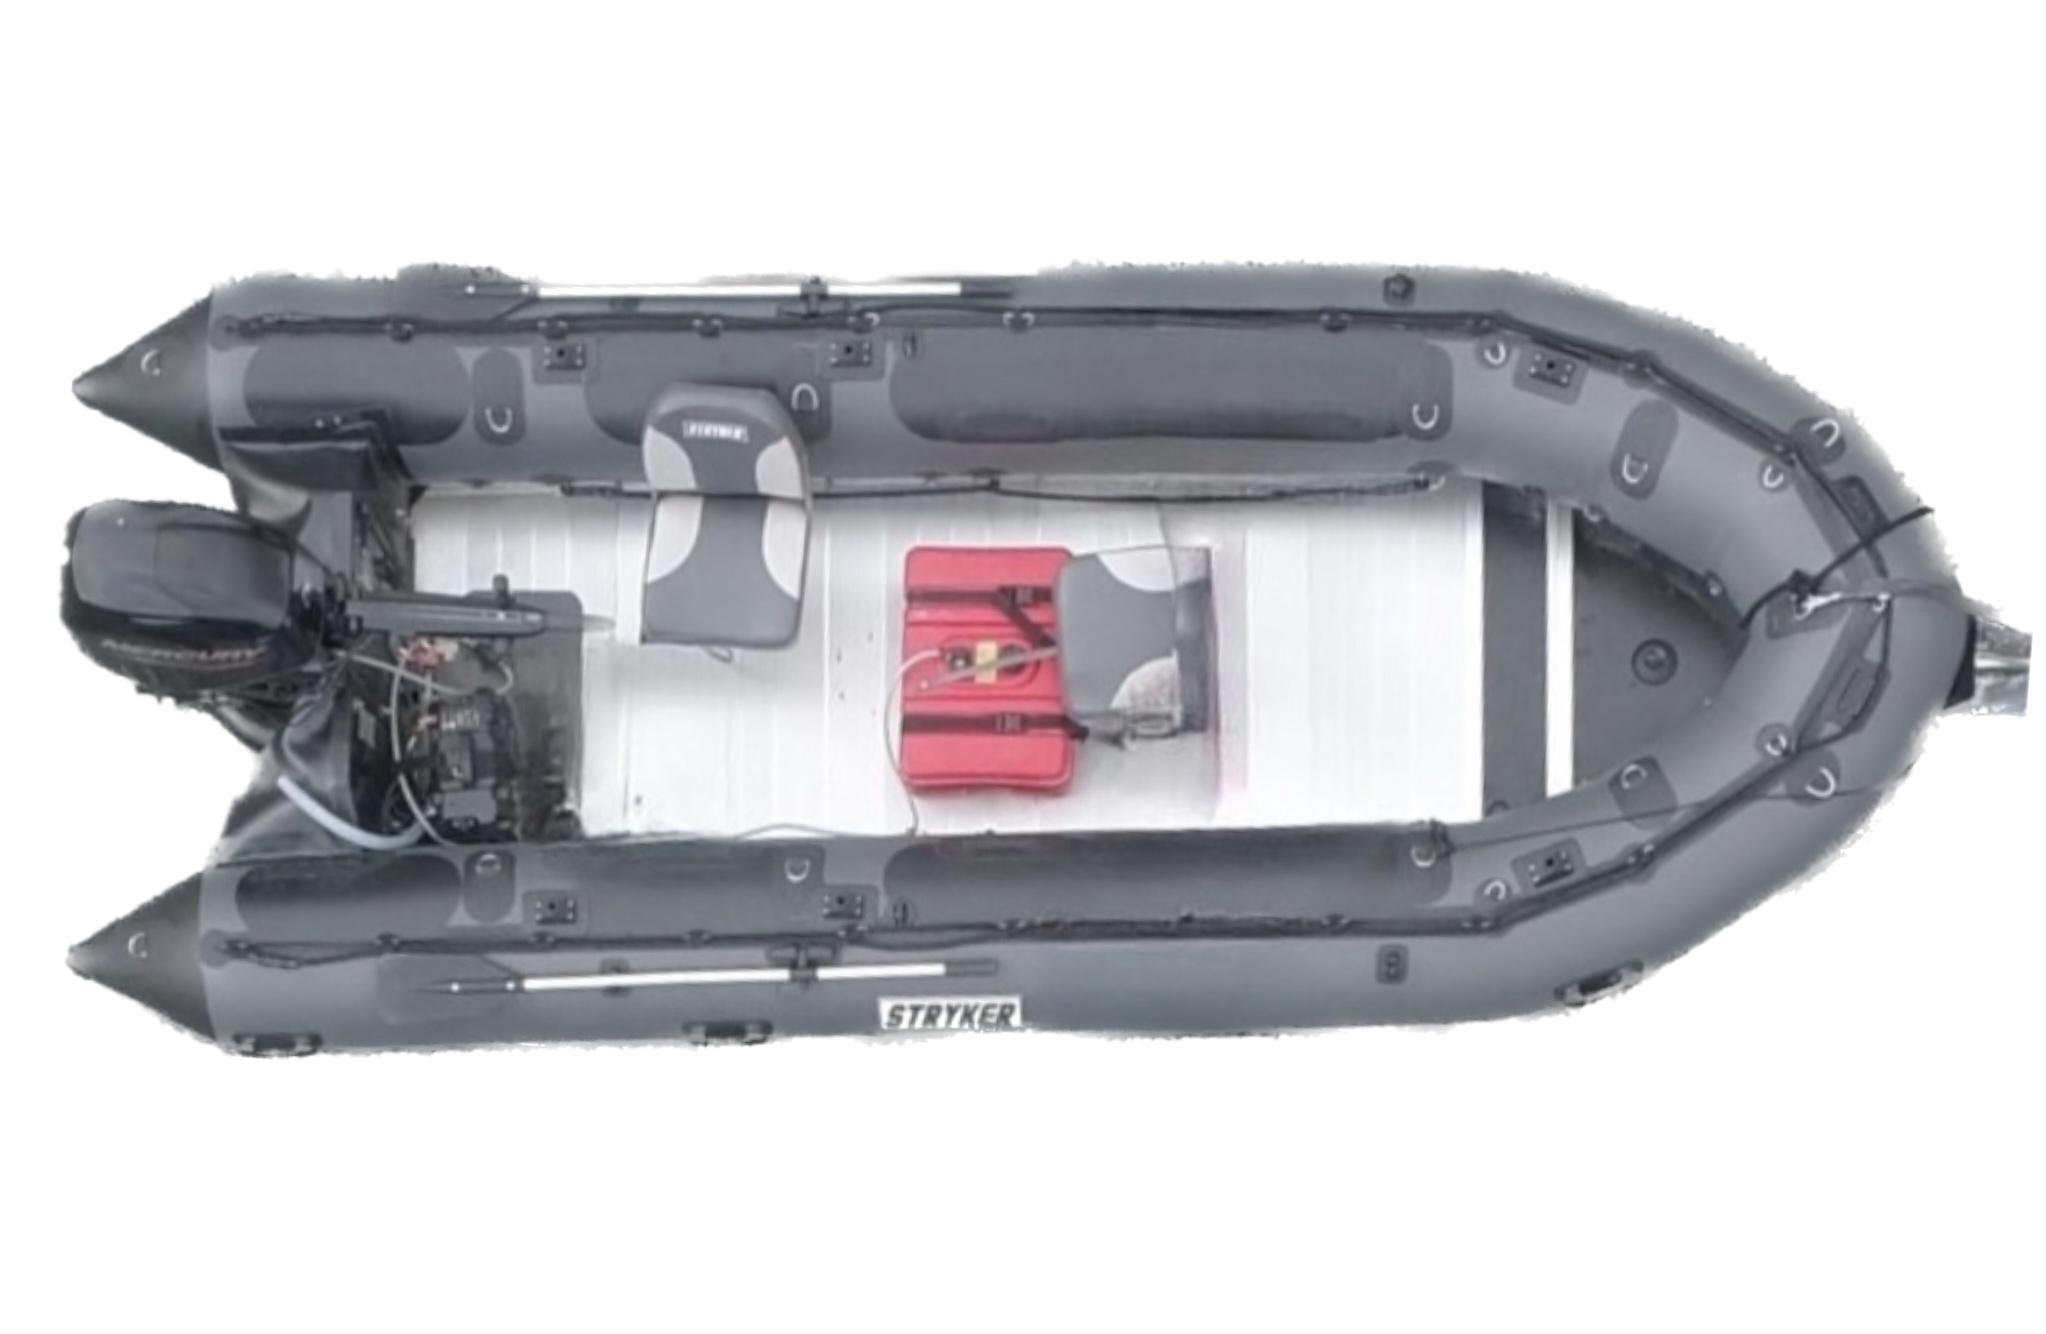 Stryker PRO 500 (16’ 4”) Inflatable Boat